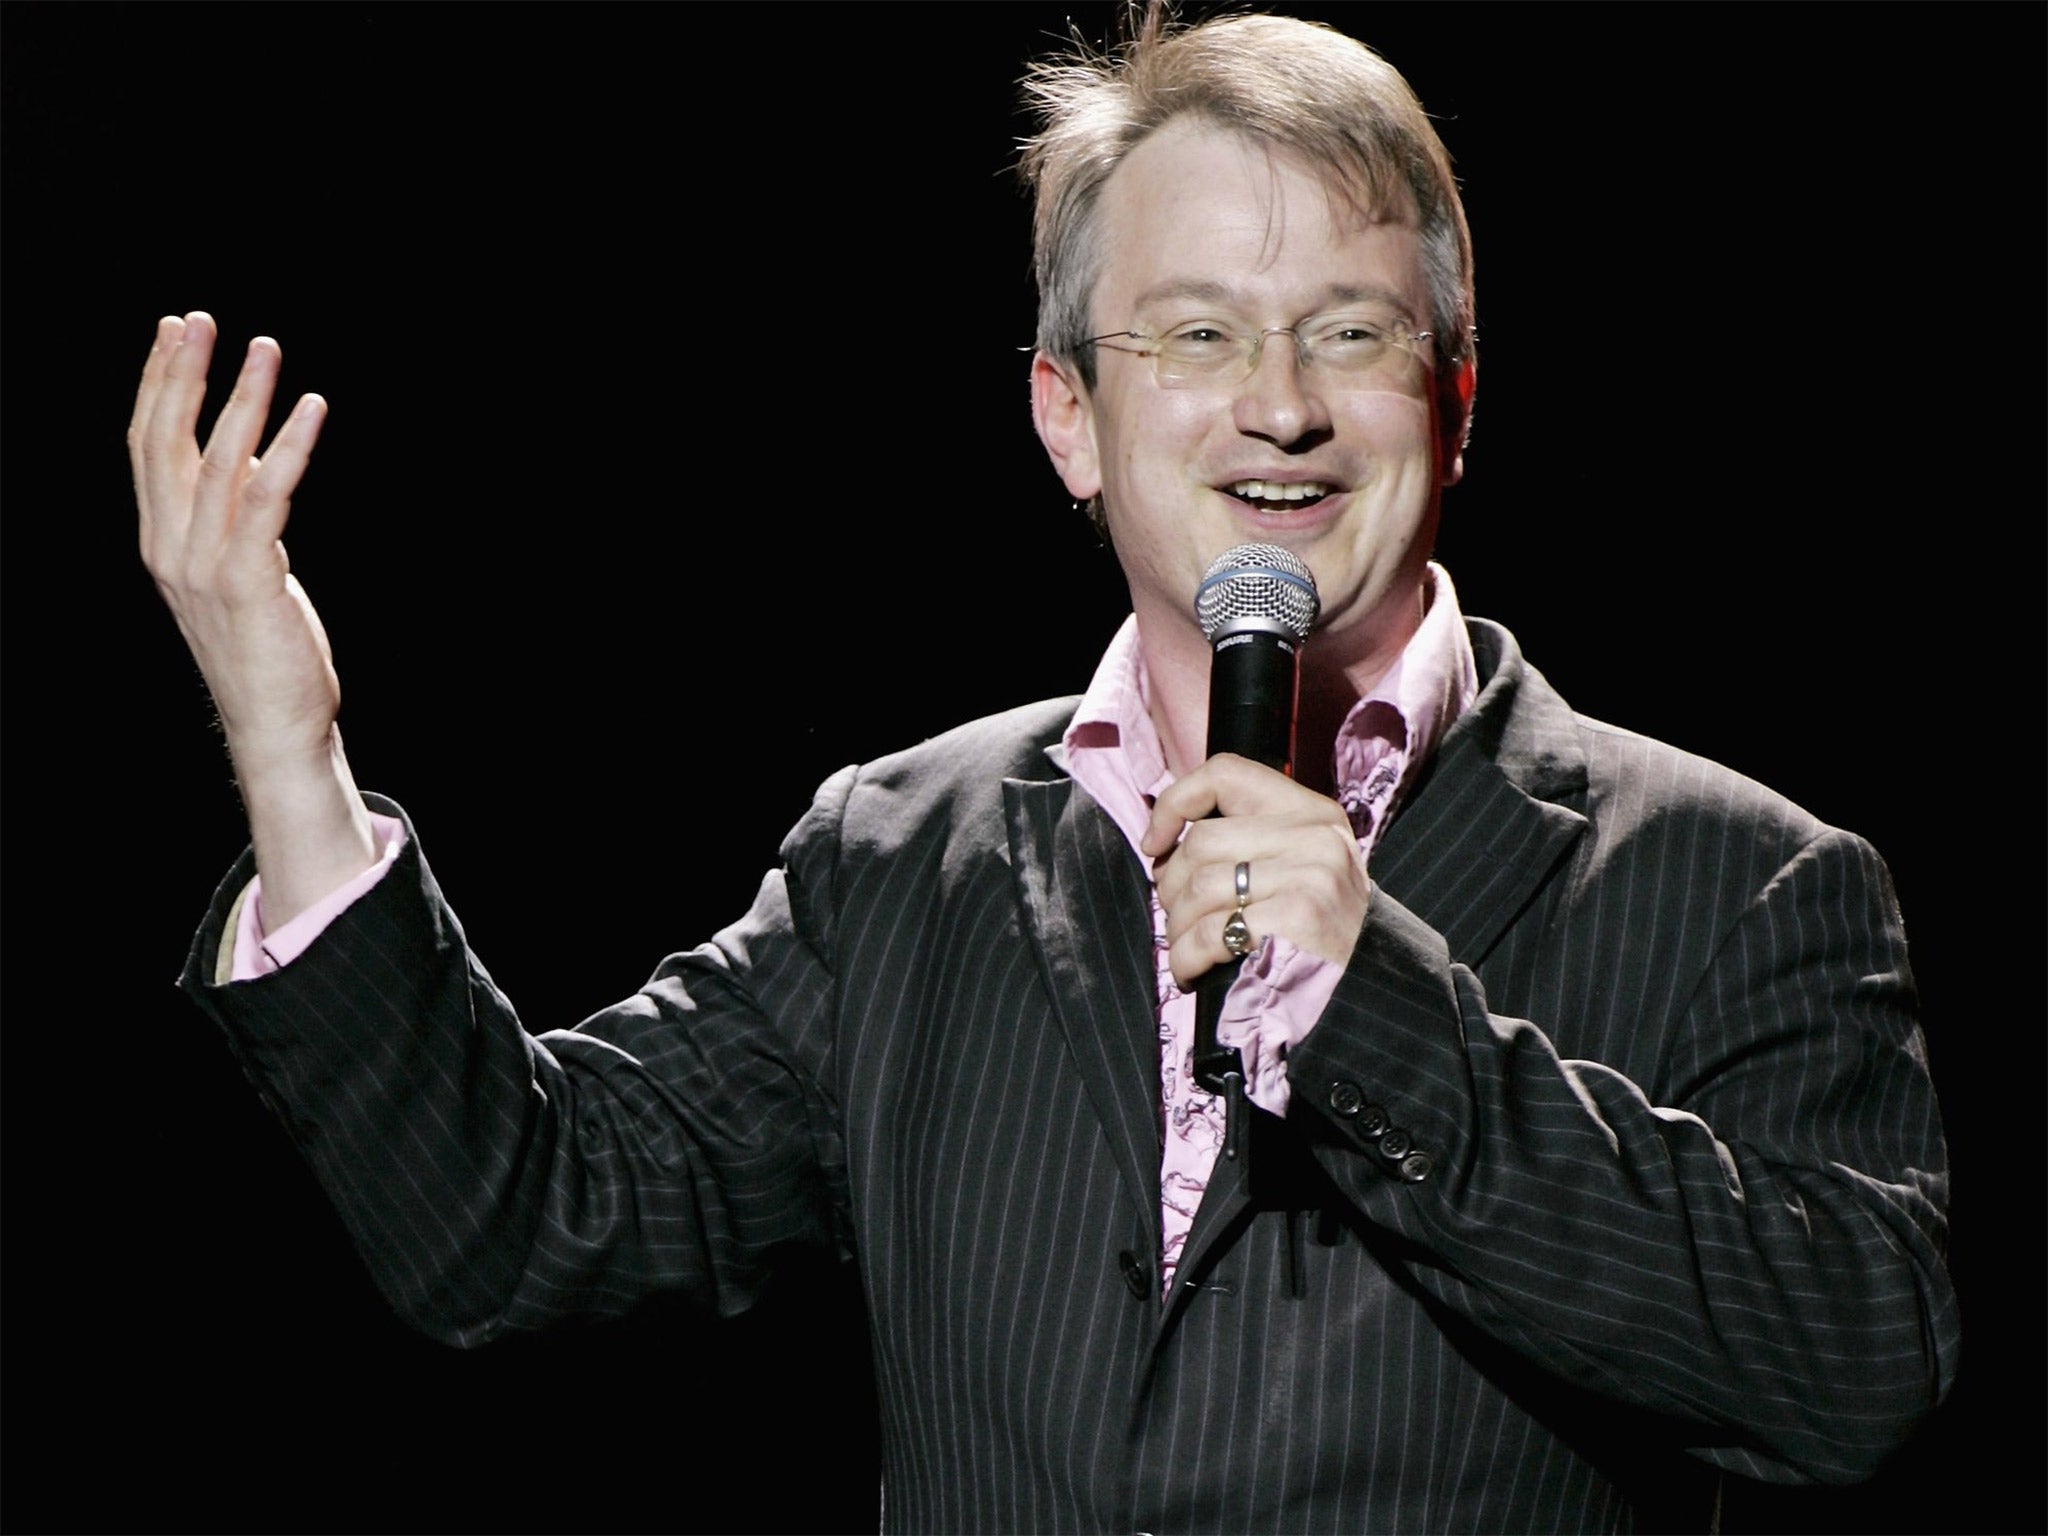 Robin Ince performing in 2006 (Getty Images)